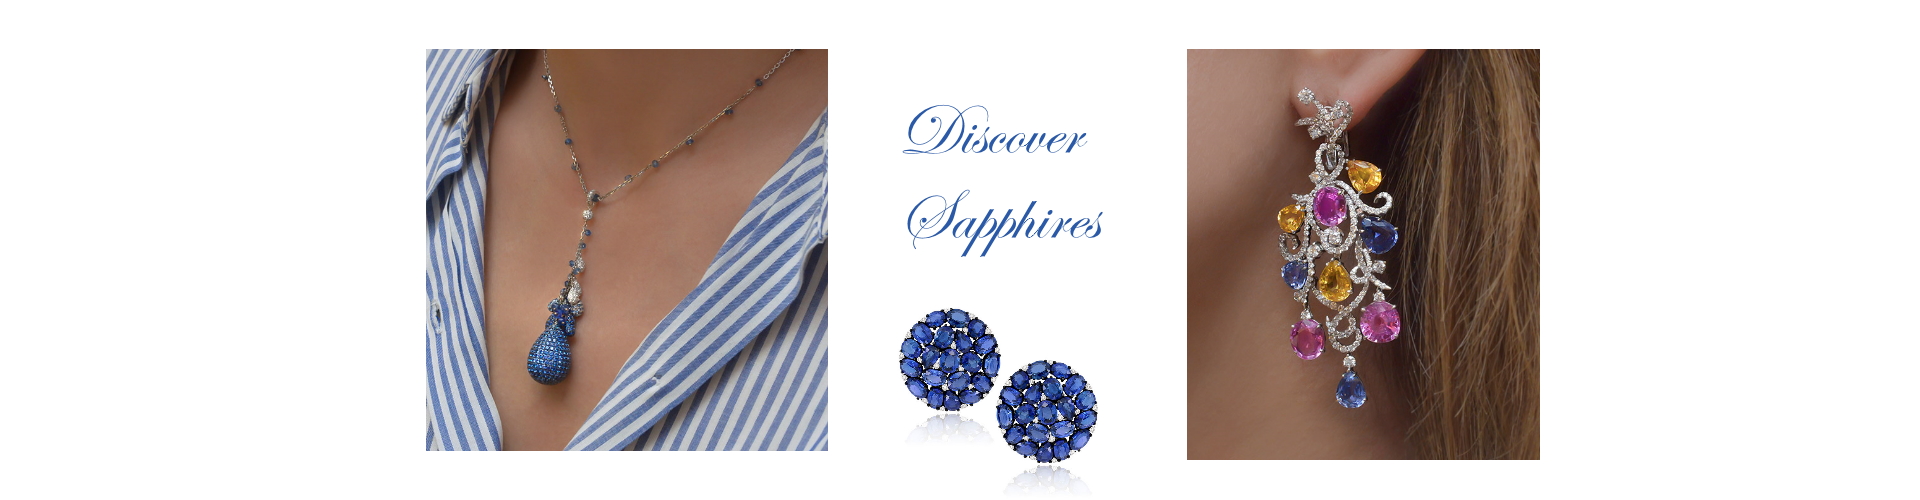 2021 10 01-Jewelry- Discover Sapphires_Cellini-Homepage-Slider-